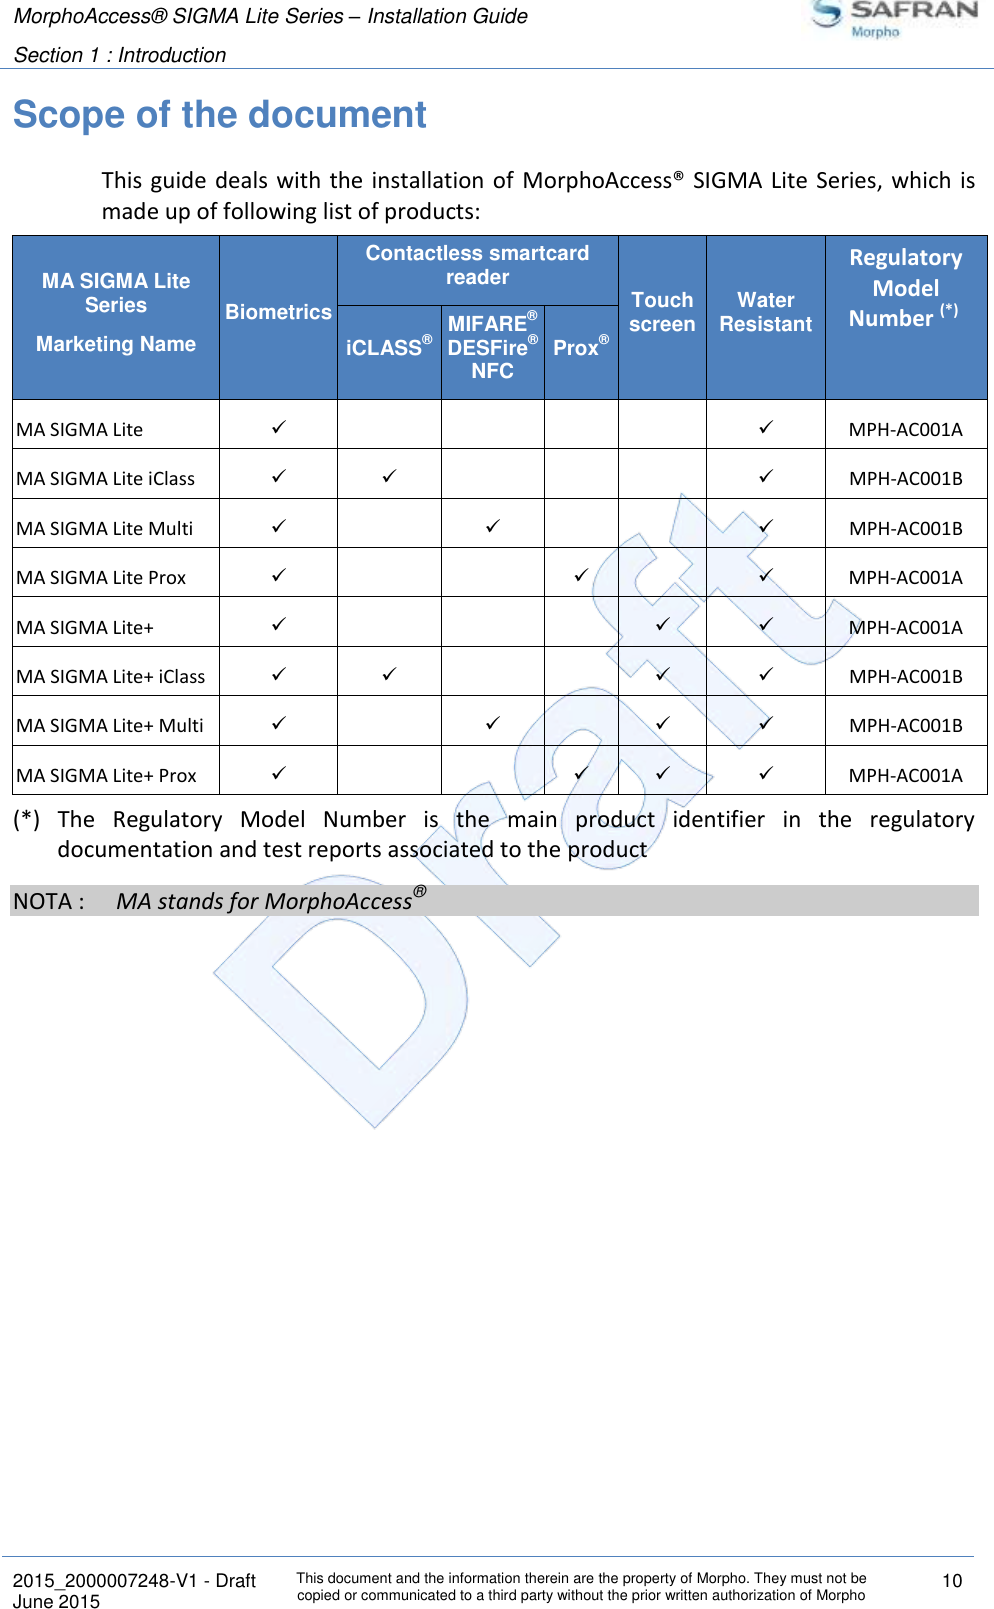 MorphoAccess® SIGMA Lite Series – Installation Guide  Section 1 : Introduction   2015_2000007248-V1 - Draft This document and the information therein are the property of Morpho. They must not be copied or communicated to a third party without the prior written authorization of Morpho 10 June 2015   Scope of the document This guide deals with the  installation of  MorphoAccess® SIGMA  Lite Series,  which is made up of following list of products: MA SIGMA Lite Series Marketing Name Biometrics Contactless smartcard reader Touch screen Water Resistant Regulatory Model Number (*)  iCLASS® MIFARE® DESFire® NFC Prox® MA SIGMA Lite       MPH-AC001A MA SIGMA Lite iClass       MPH-AC001B MA SIGMA Lite Multi       MPH-AC001B MA SIGMA Lite Prox       MPH-AC001A MA SIGMA Lite+       MPH-AC001A MA SIGMA Lite+ iClass       MPH-AC001B MA SIGMA Lite+ Multi       MPH-AC001B MA SIGMA Lite+ Prox       MPH-AC001A (*)  The  Regulatory  Model  Number  is  the  main  product  identifier  in  the  regulatory documentation and test reports associated to the product NOTA :  MA stands for MorphoAccess®  